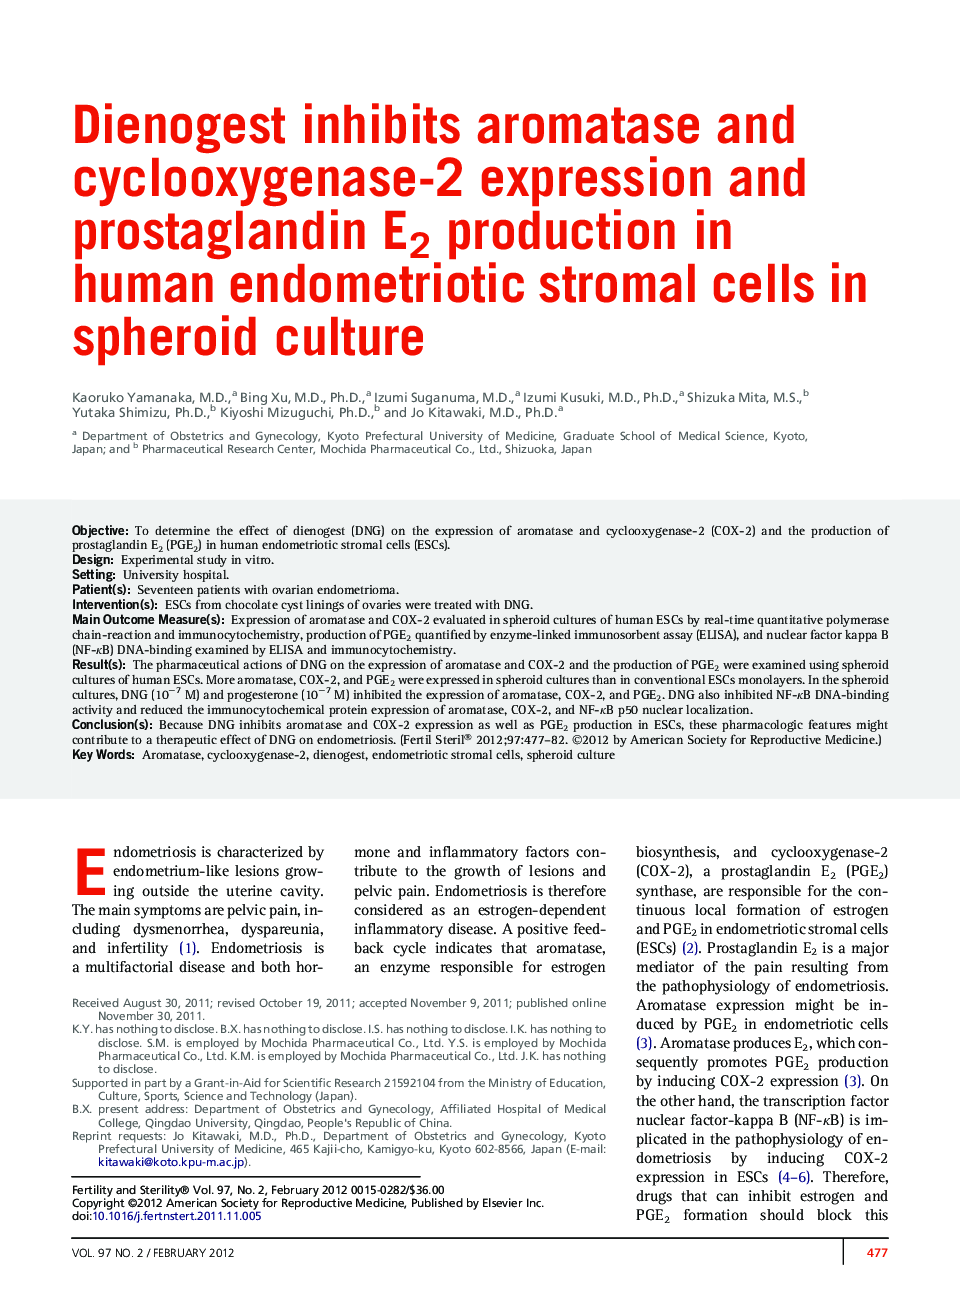 Dienogest inhibits aromatase and cyclooxygenase-2 expression and prostaglandin E2 production in human endometriotic stromal cells in spheroid culture 